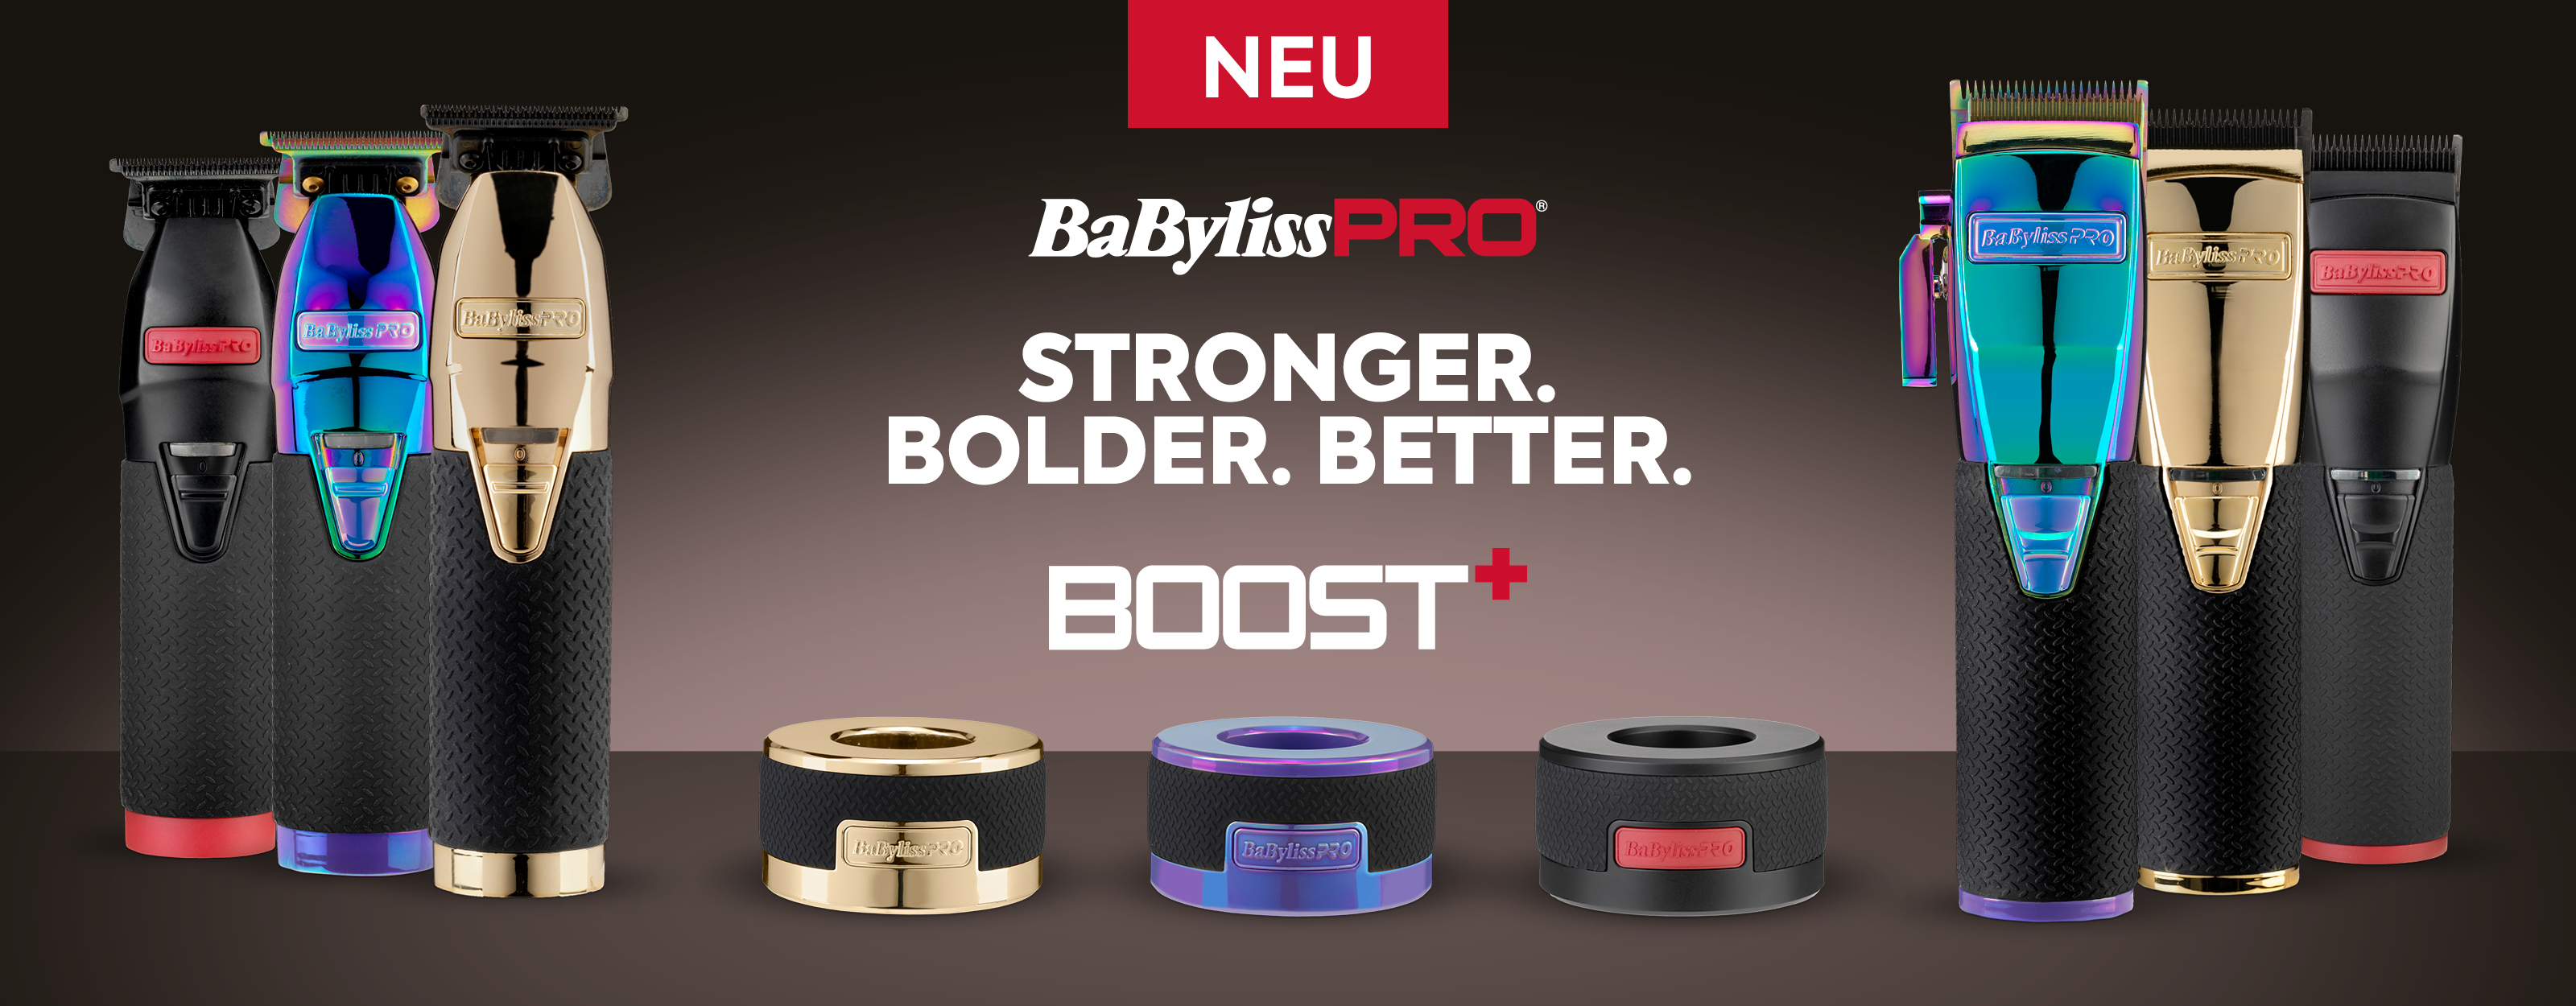 Babyliss Boost+